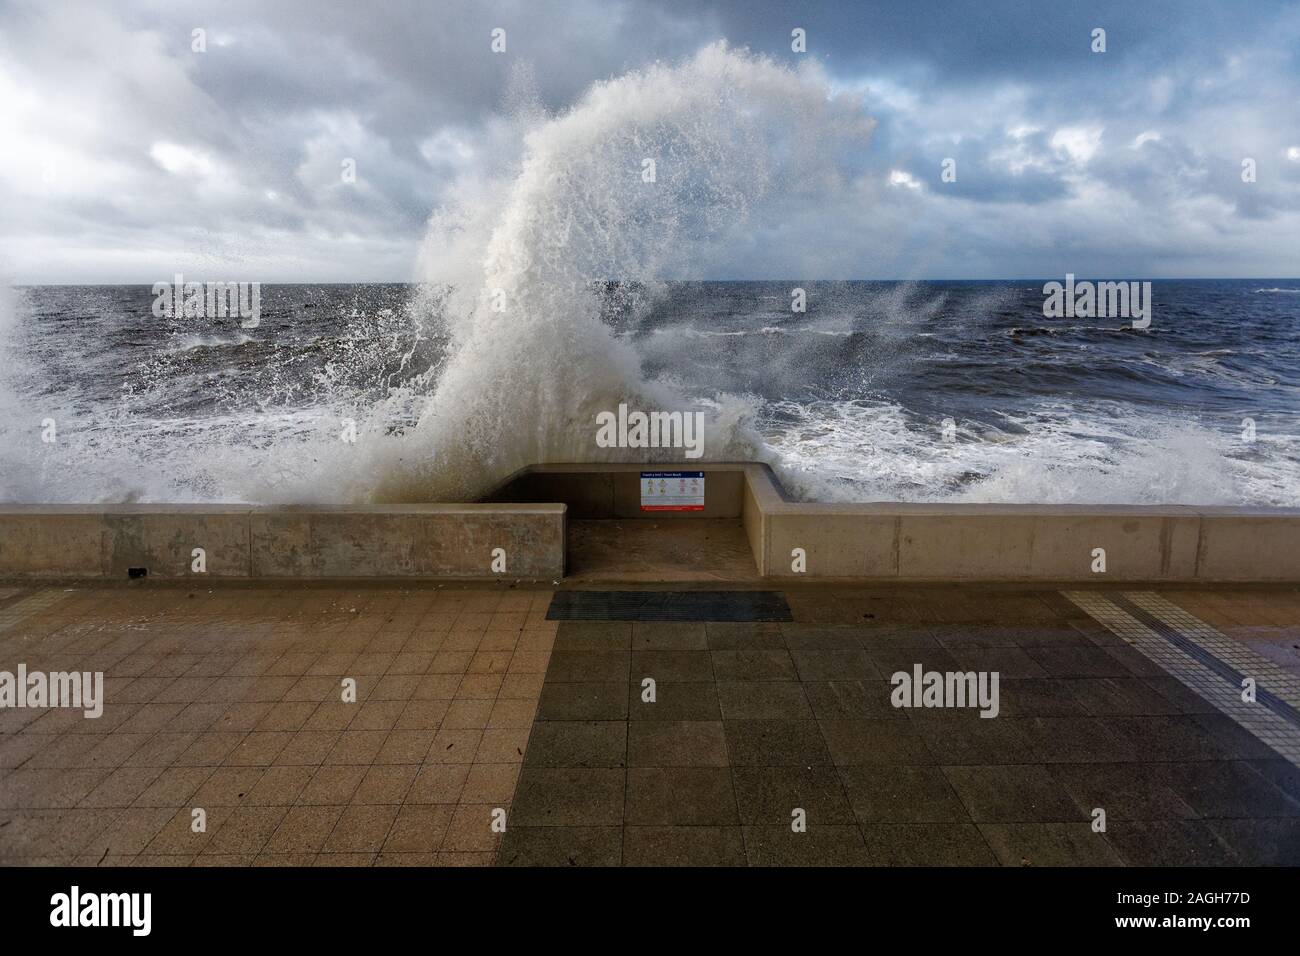 Pictured: Waves crash against the promenade wall in Porthcawl, Wales, UK. Tuesday 01 October 2019 Re: Heavy rain and strong winds caused by Hurricane Stock Photo